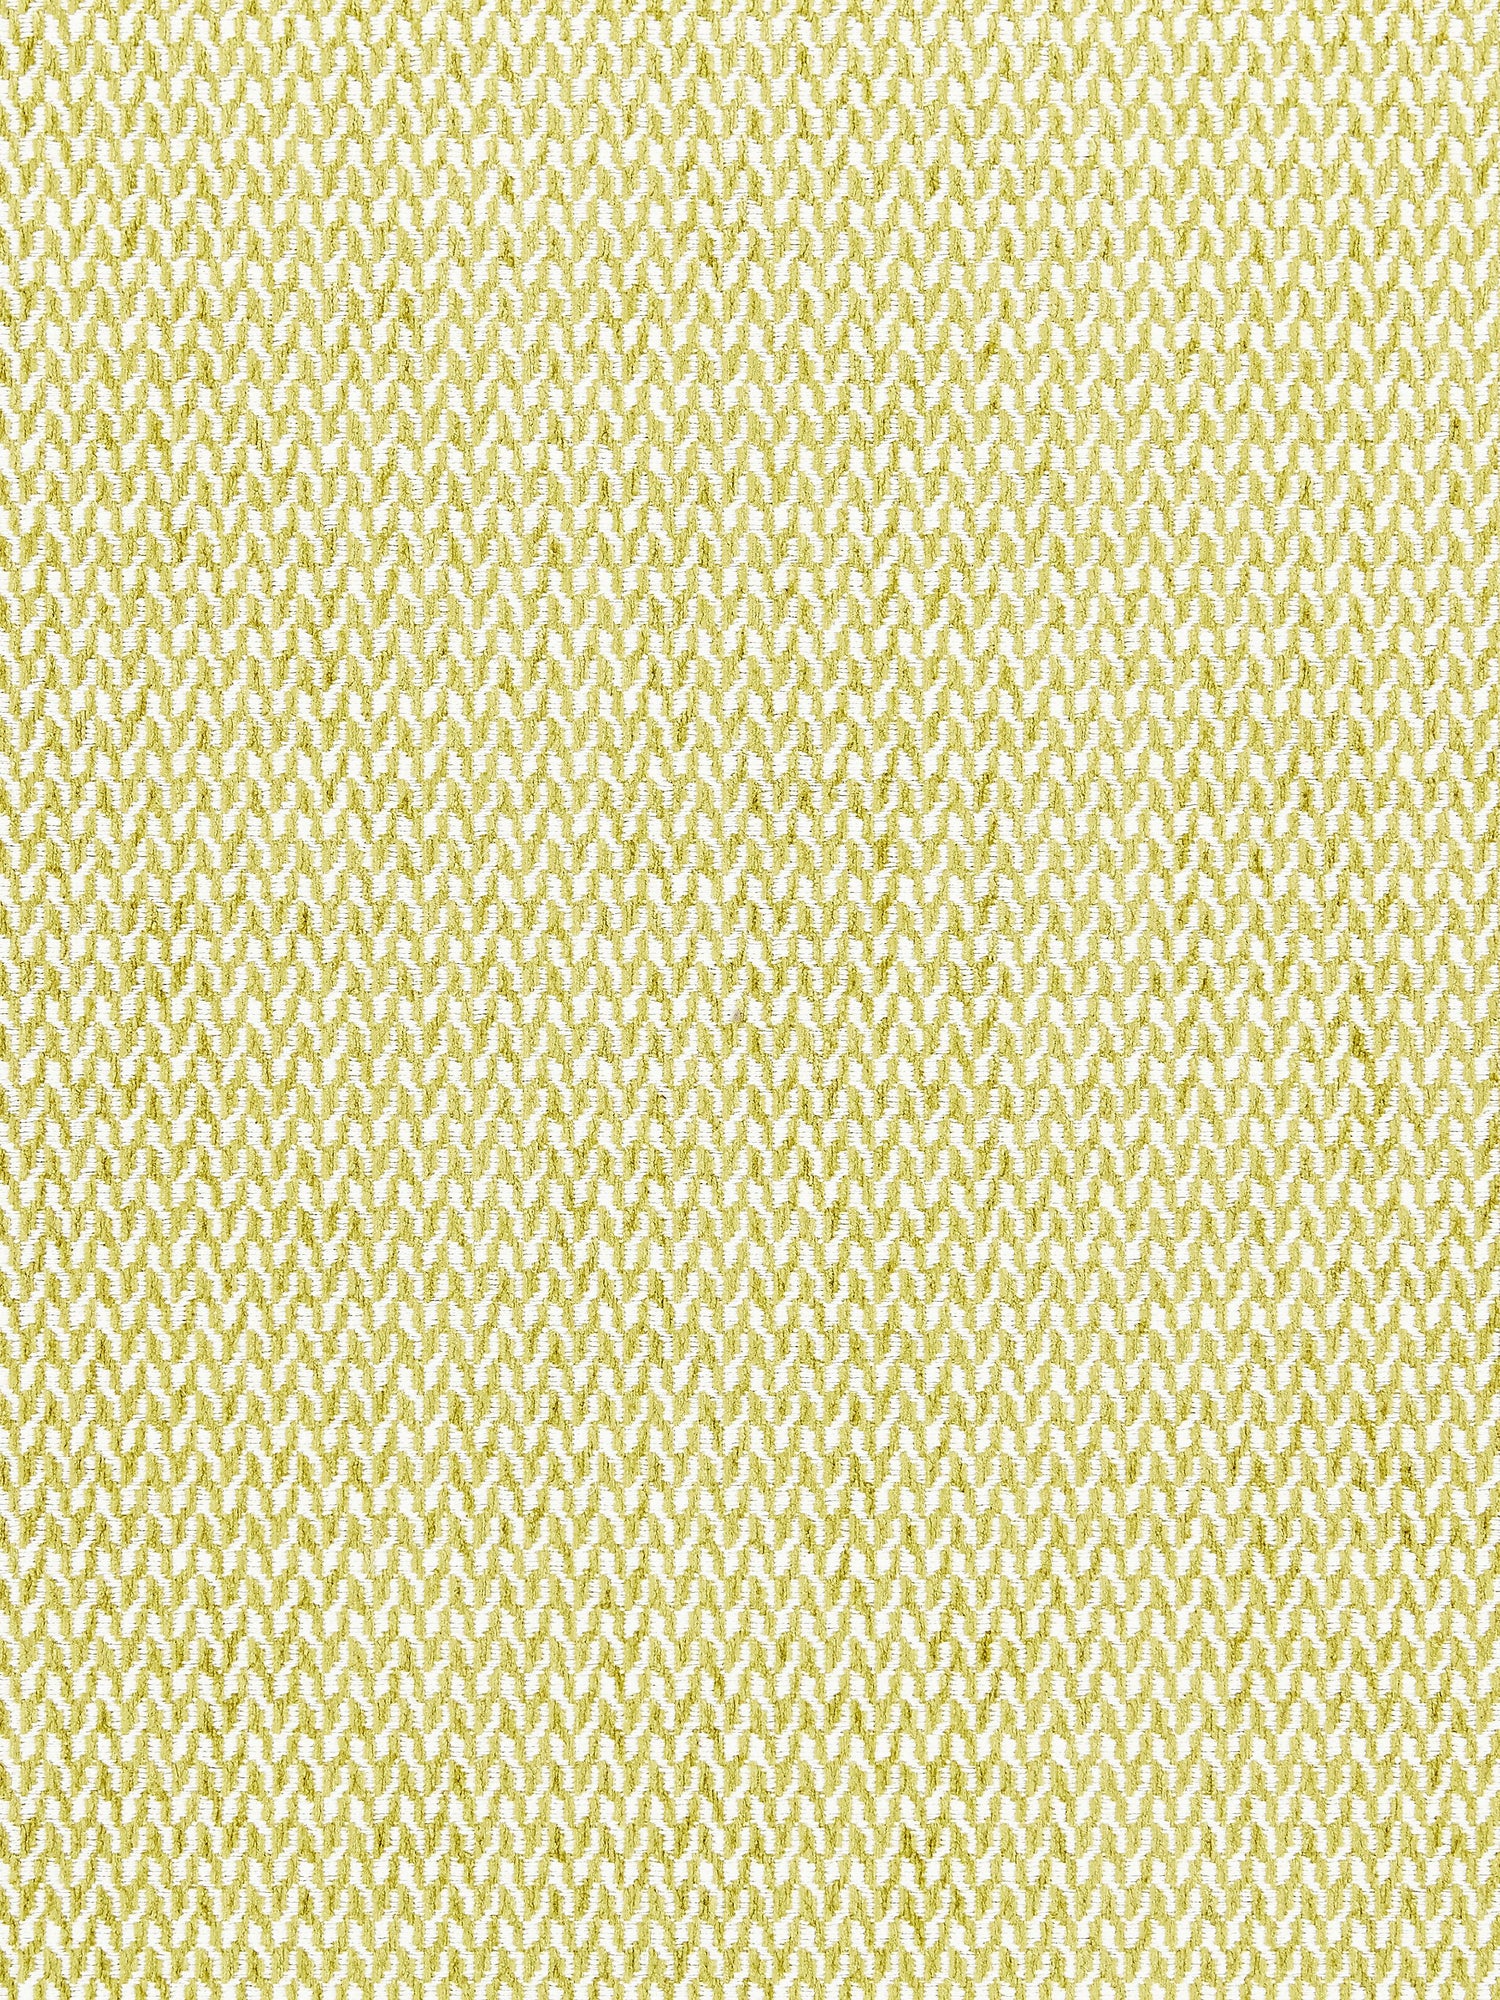 Cortona Chenille fabric in fern color - pattern number SC 000327104 - by Scalamandre in the Scalamandre Fabrics Book 1 collection